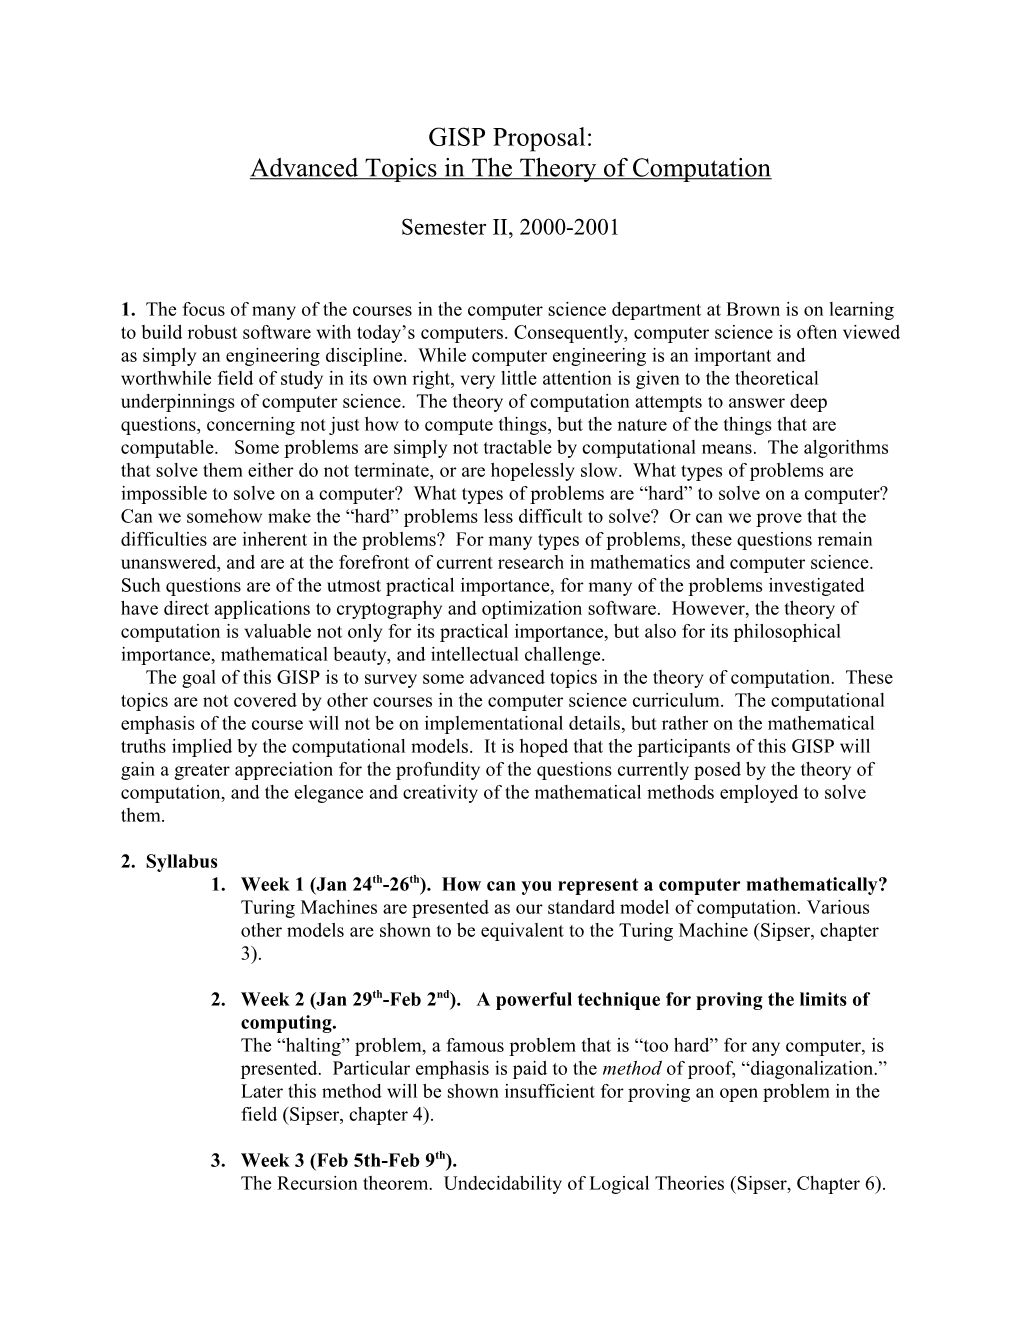 Advanced Topics in the Theory of Computation